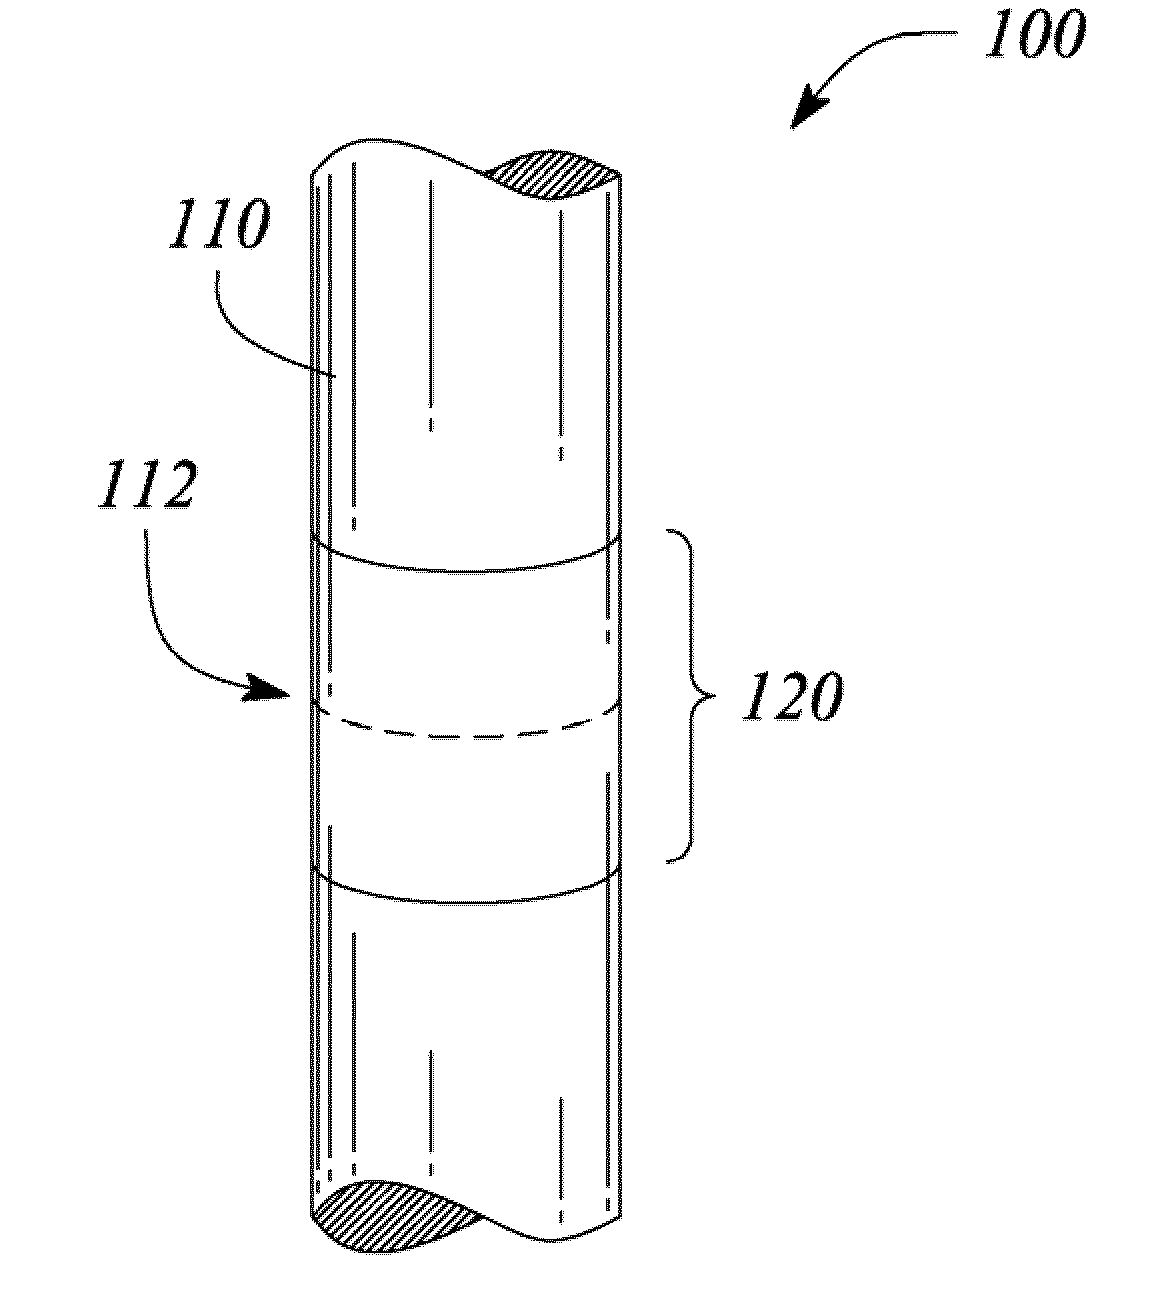 Nanowire-Based Semiconductor Device And Method Employing Removal Of Residual Carriers